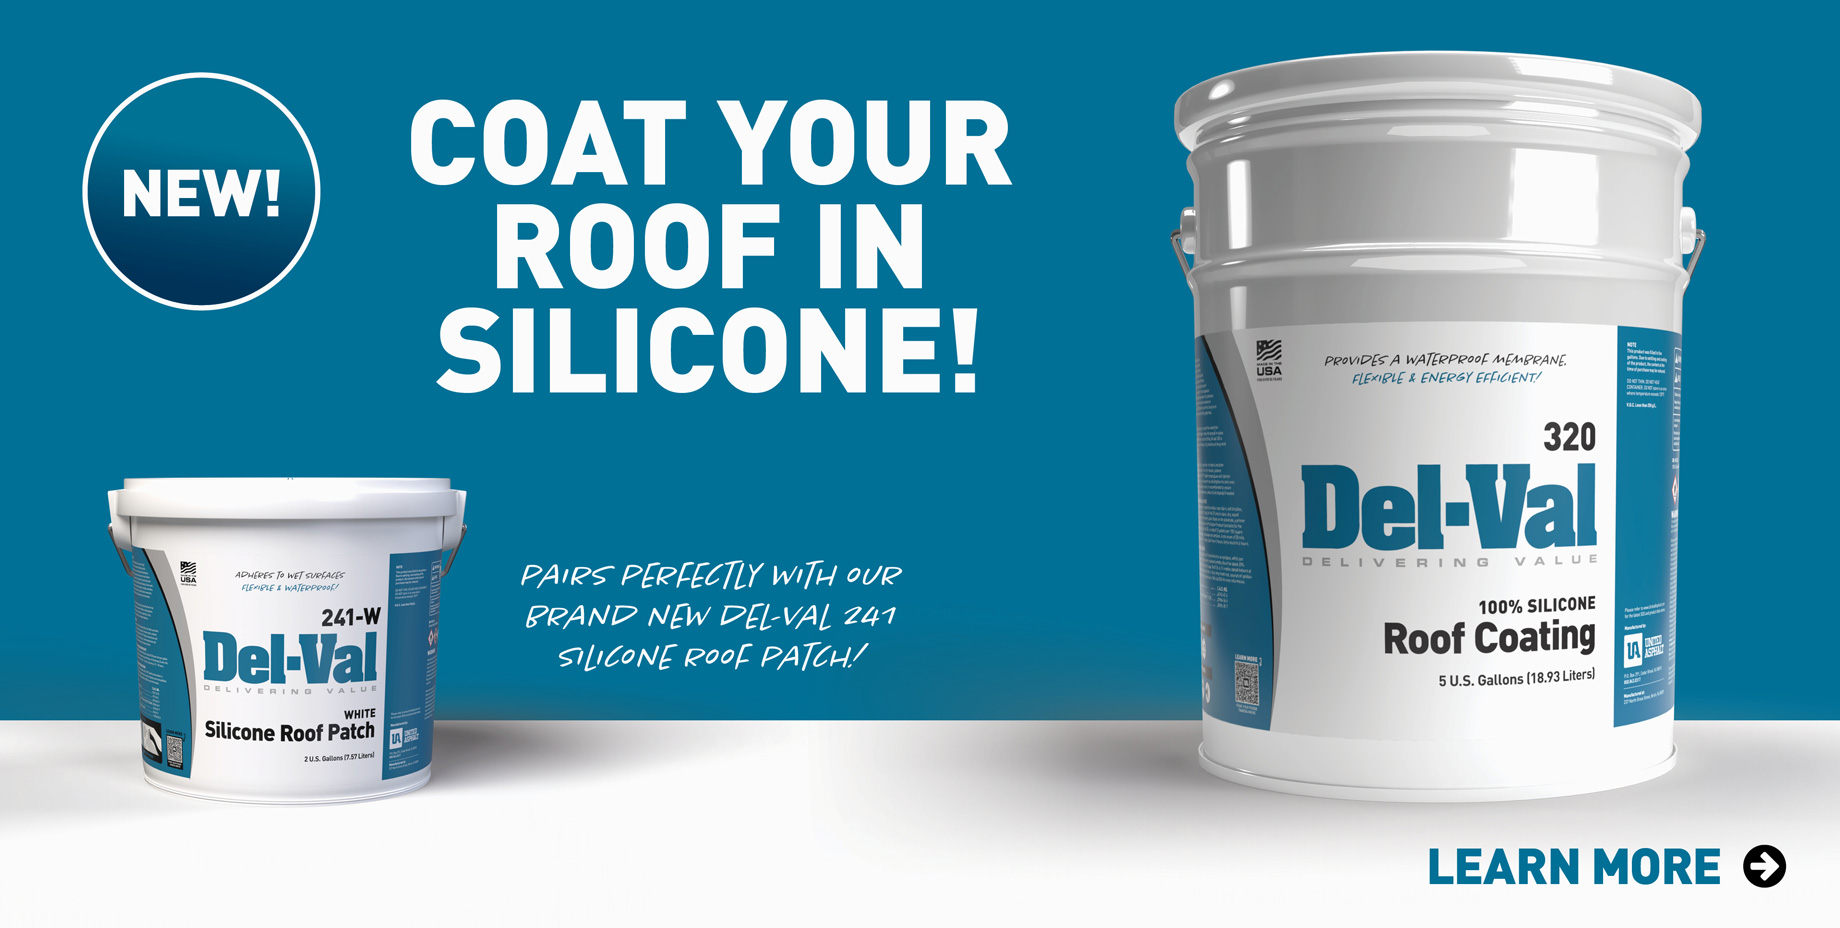 Del-Val 320 Silicone Roof Coating Introduction Hero Slide